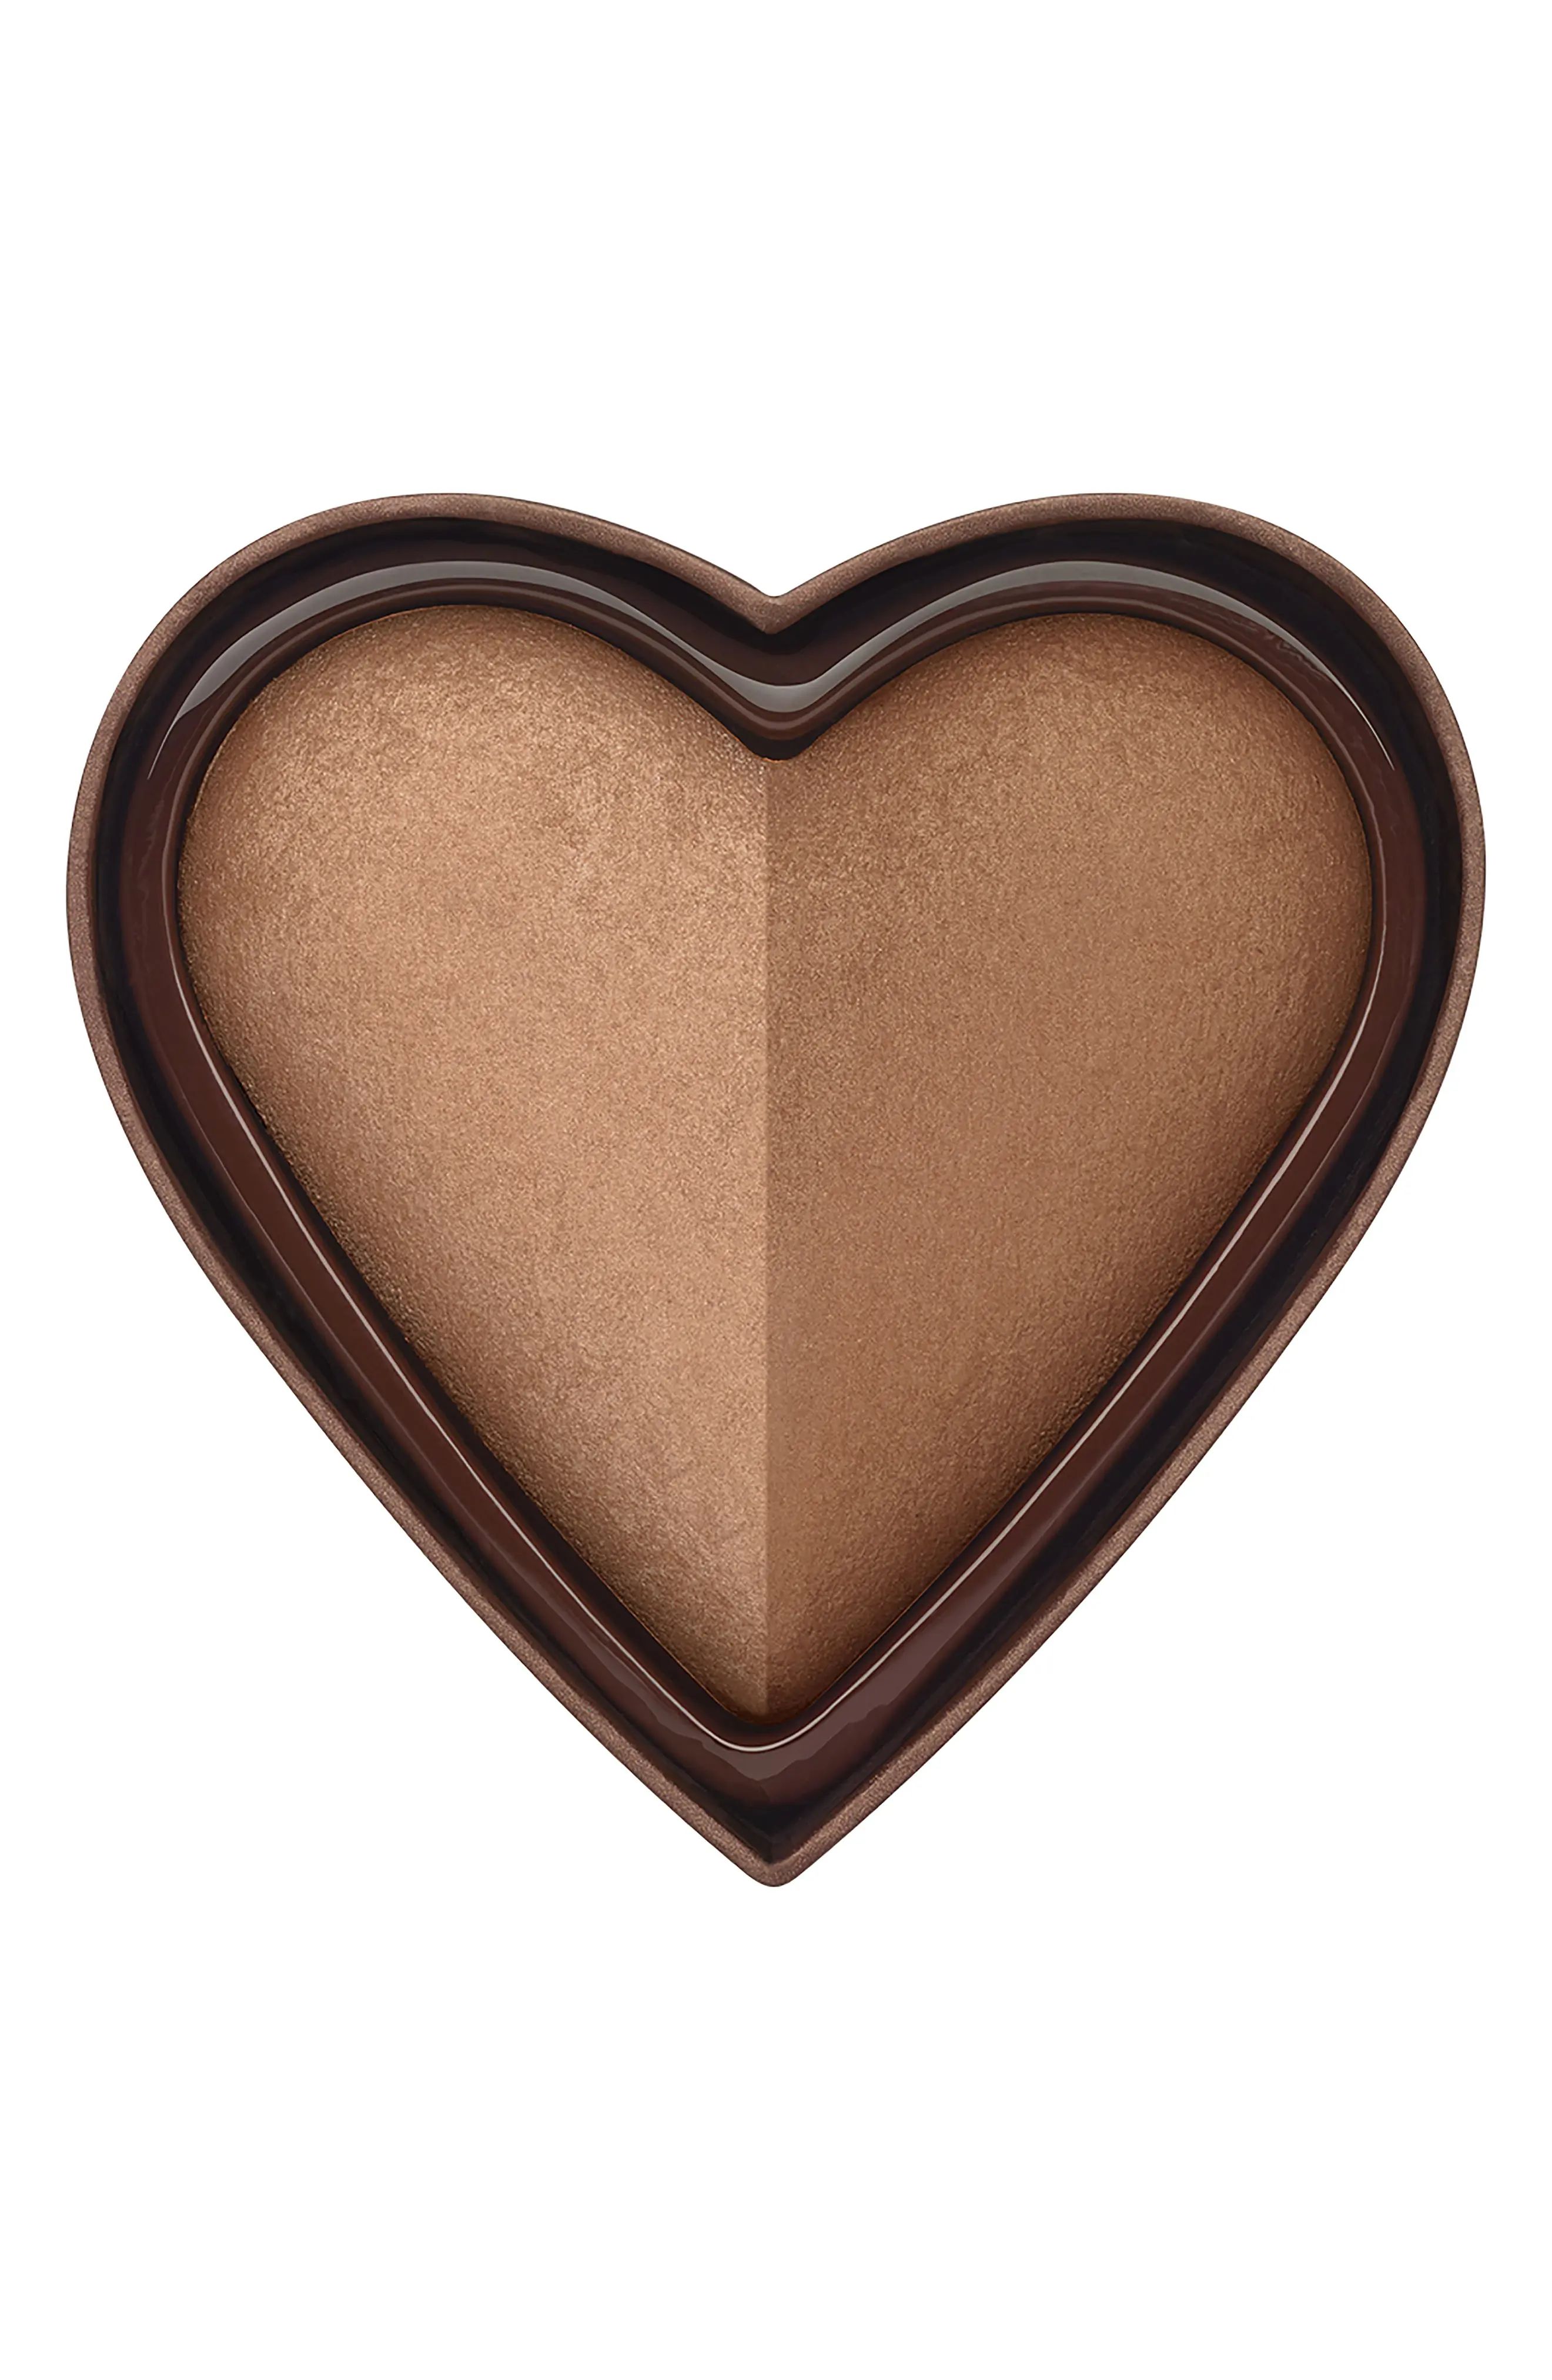 Too Faced Sweethearts Bronzer - | Nordstrom